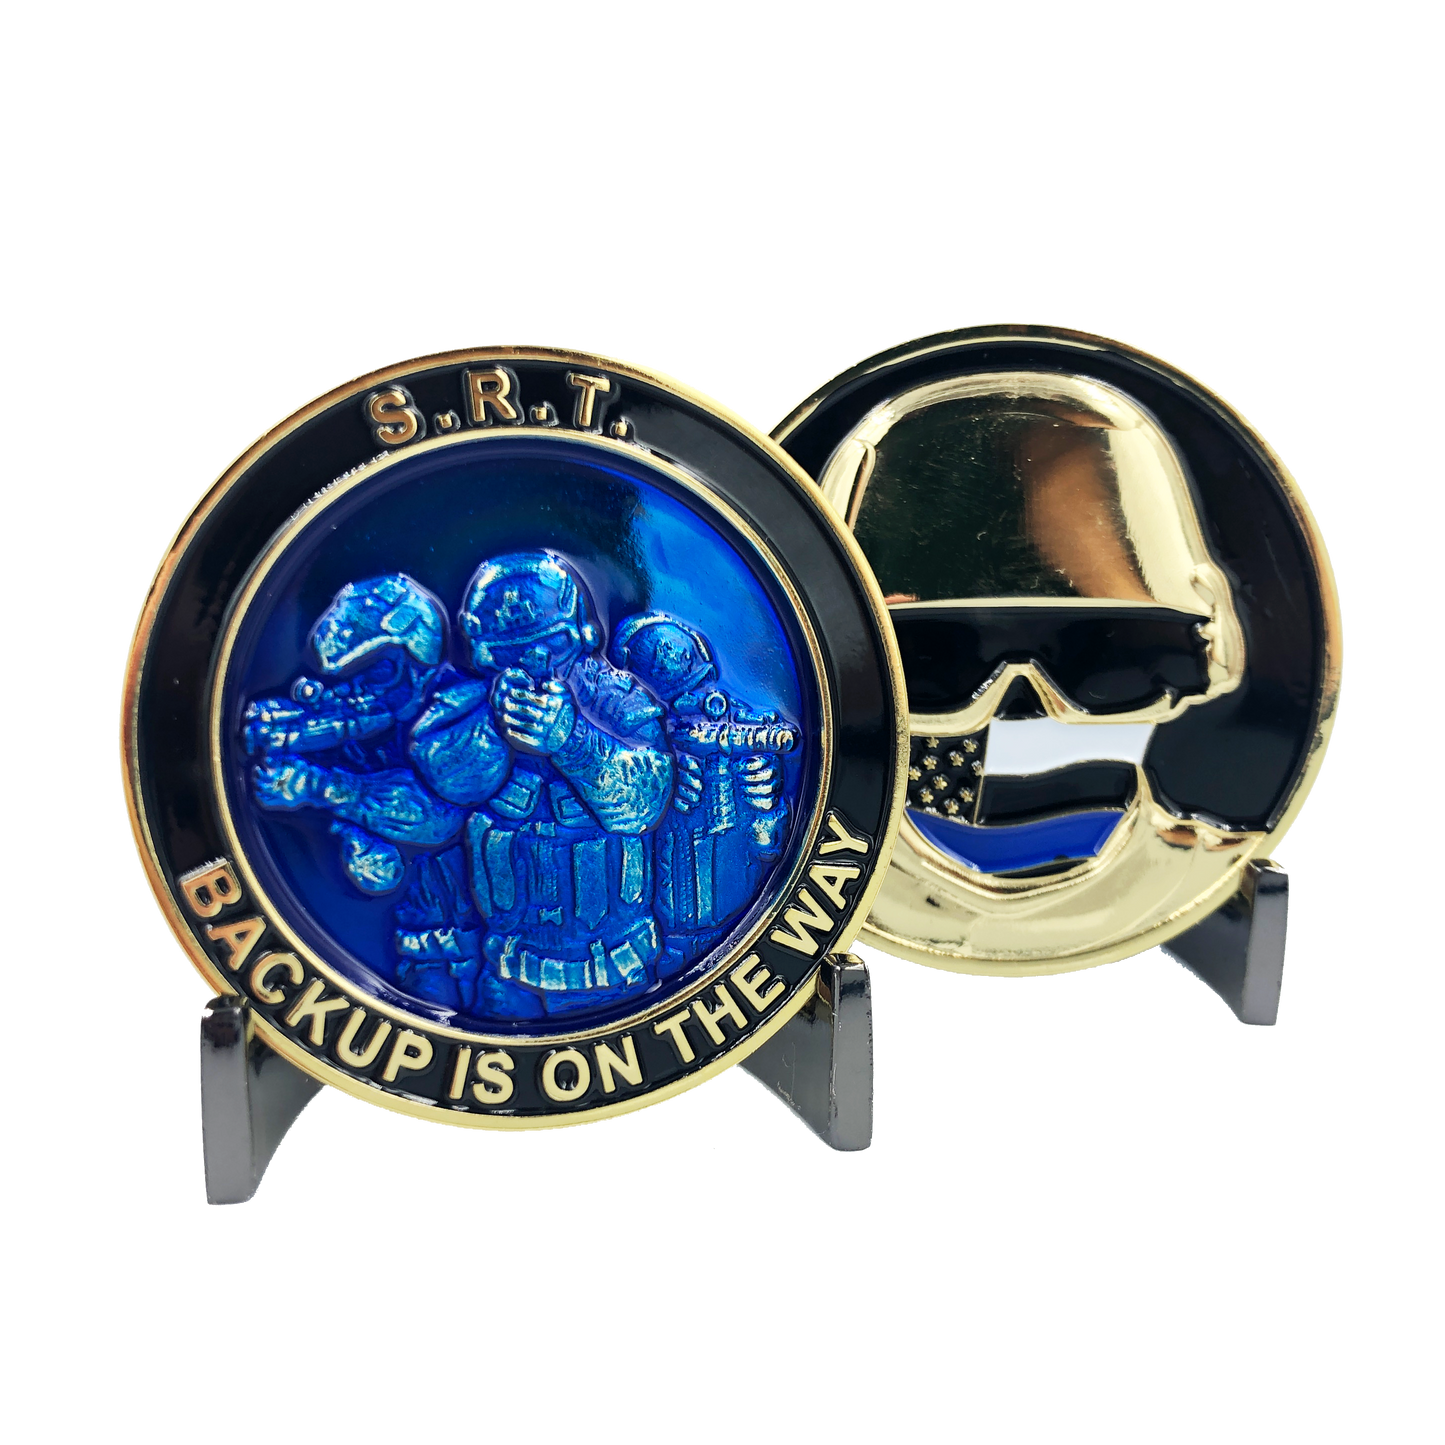 A-006 SRT OPERATOR police challenge coin Thin Blue Line NYPD LAPD CHICAGO FBI CBP